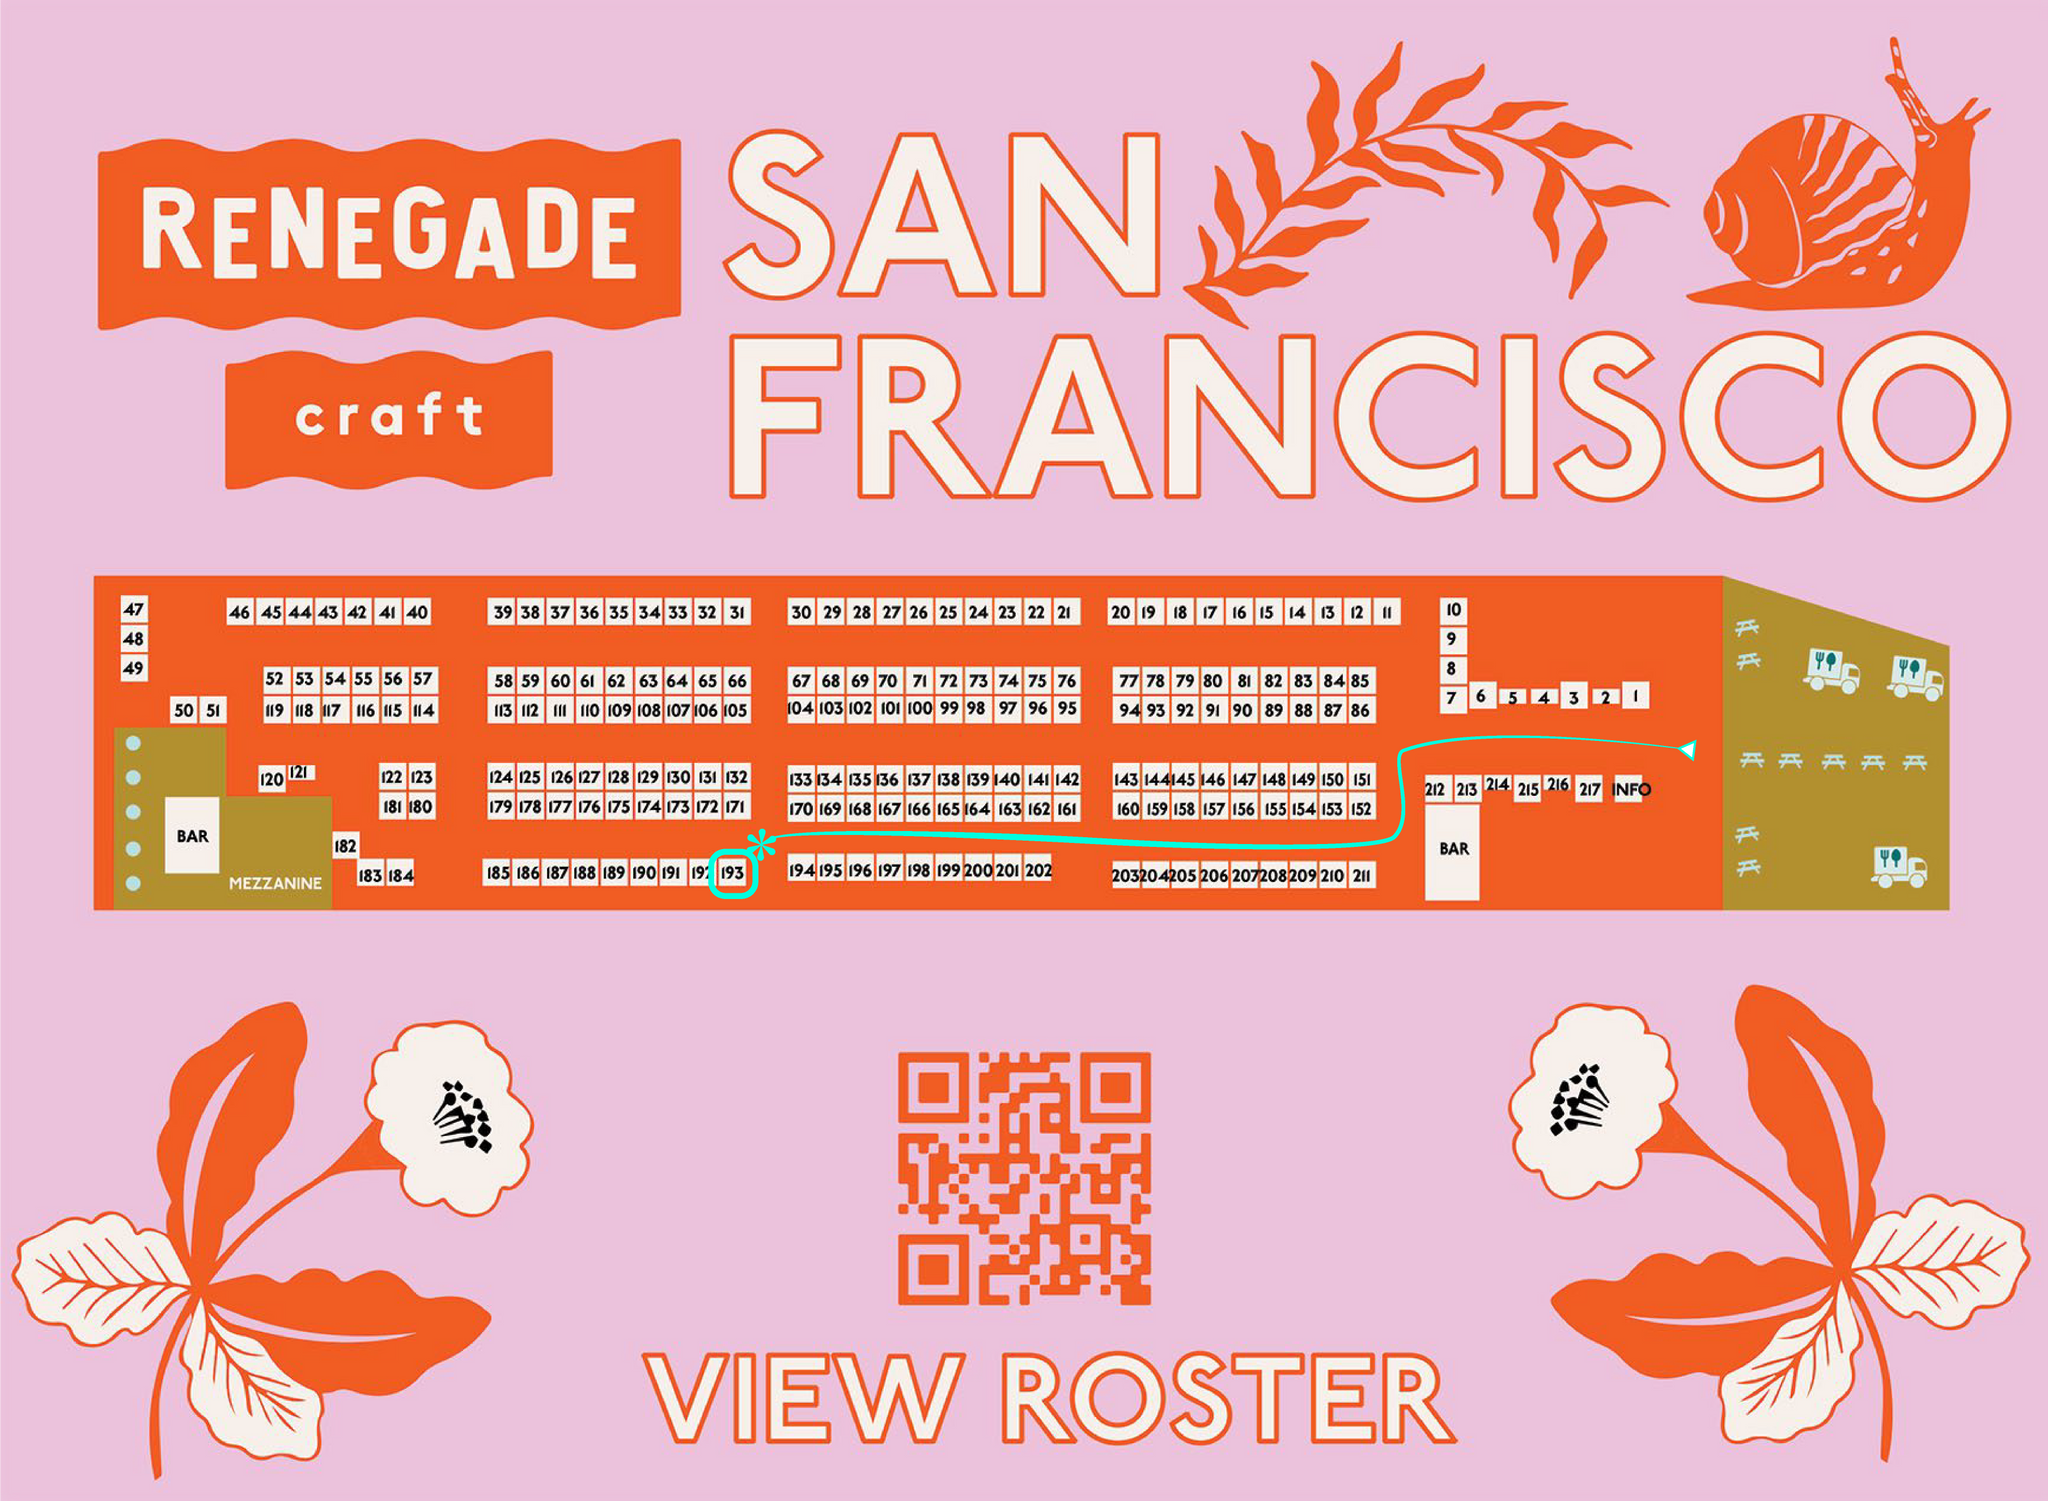 San Francisco Event Map by Renegade Craft